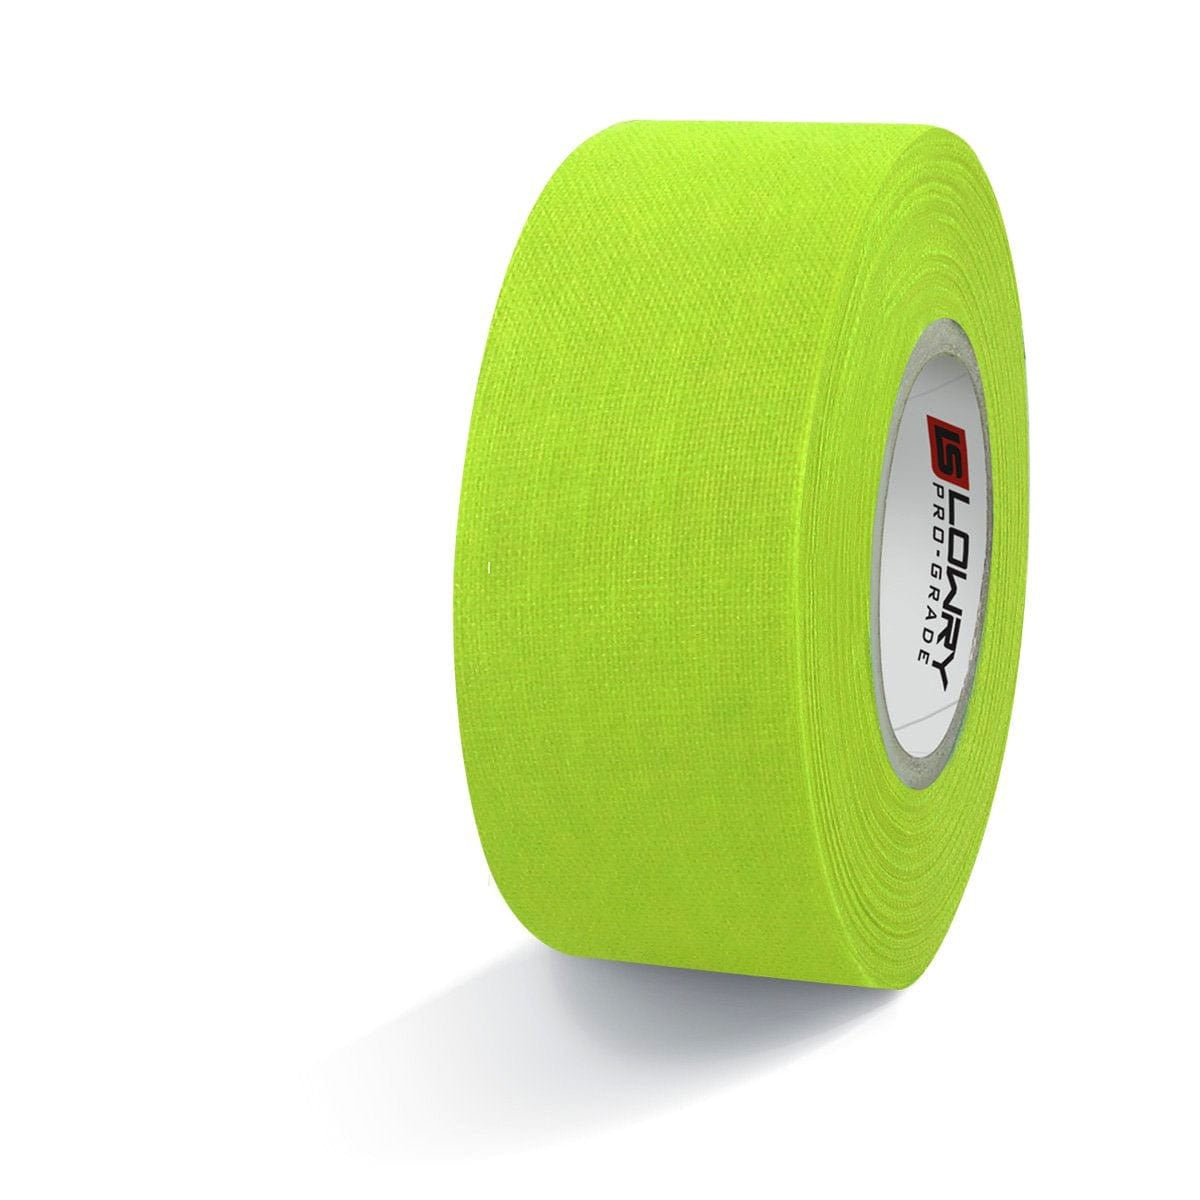 Lowry Sports Pro-Grade Colored Specialty Hockey Stick Tape